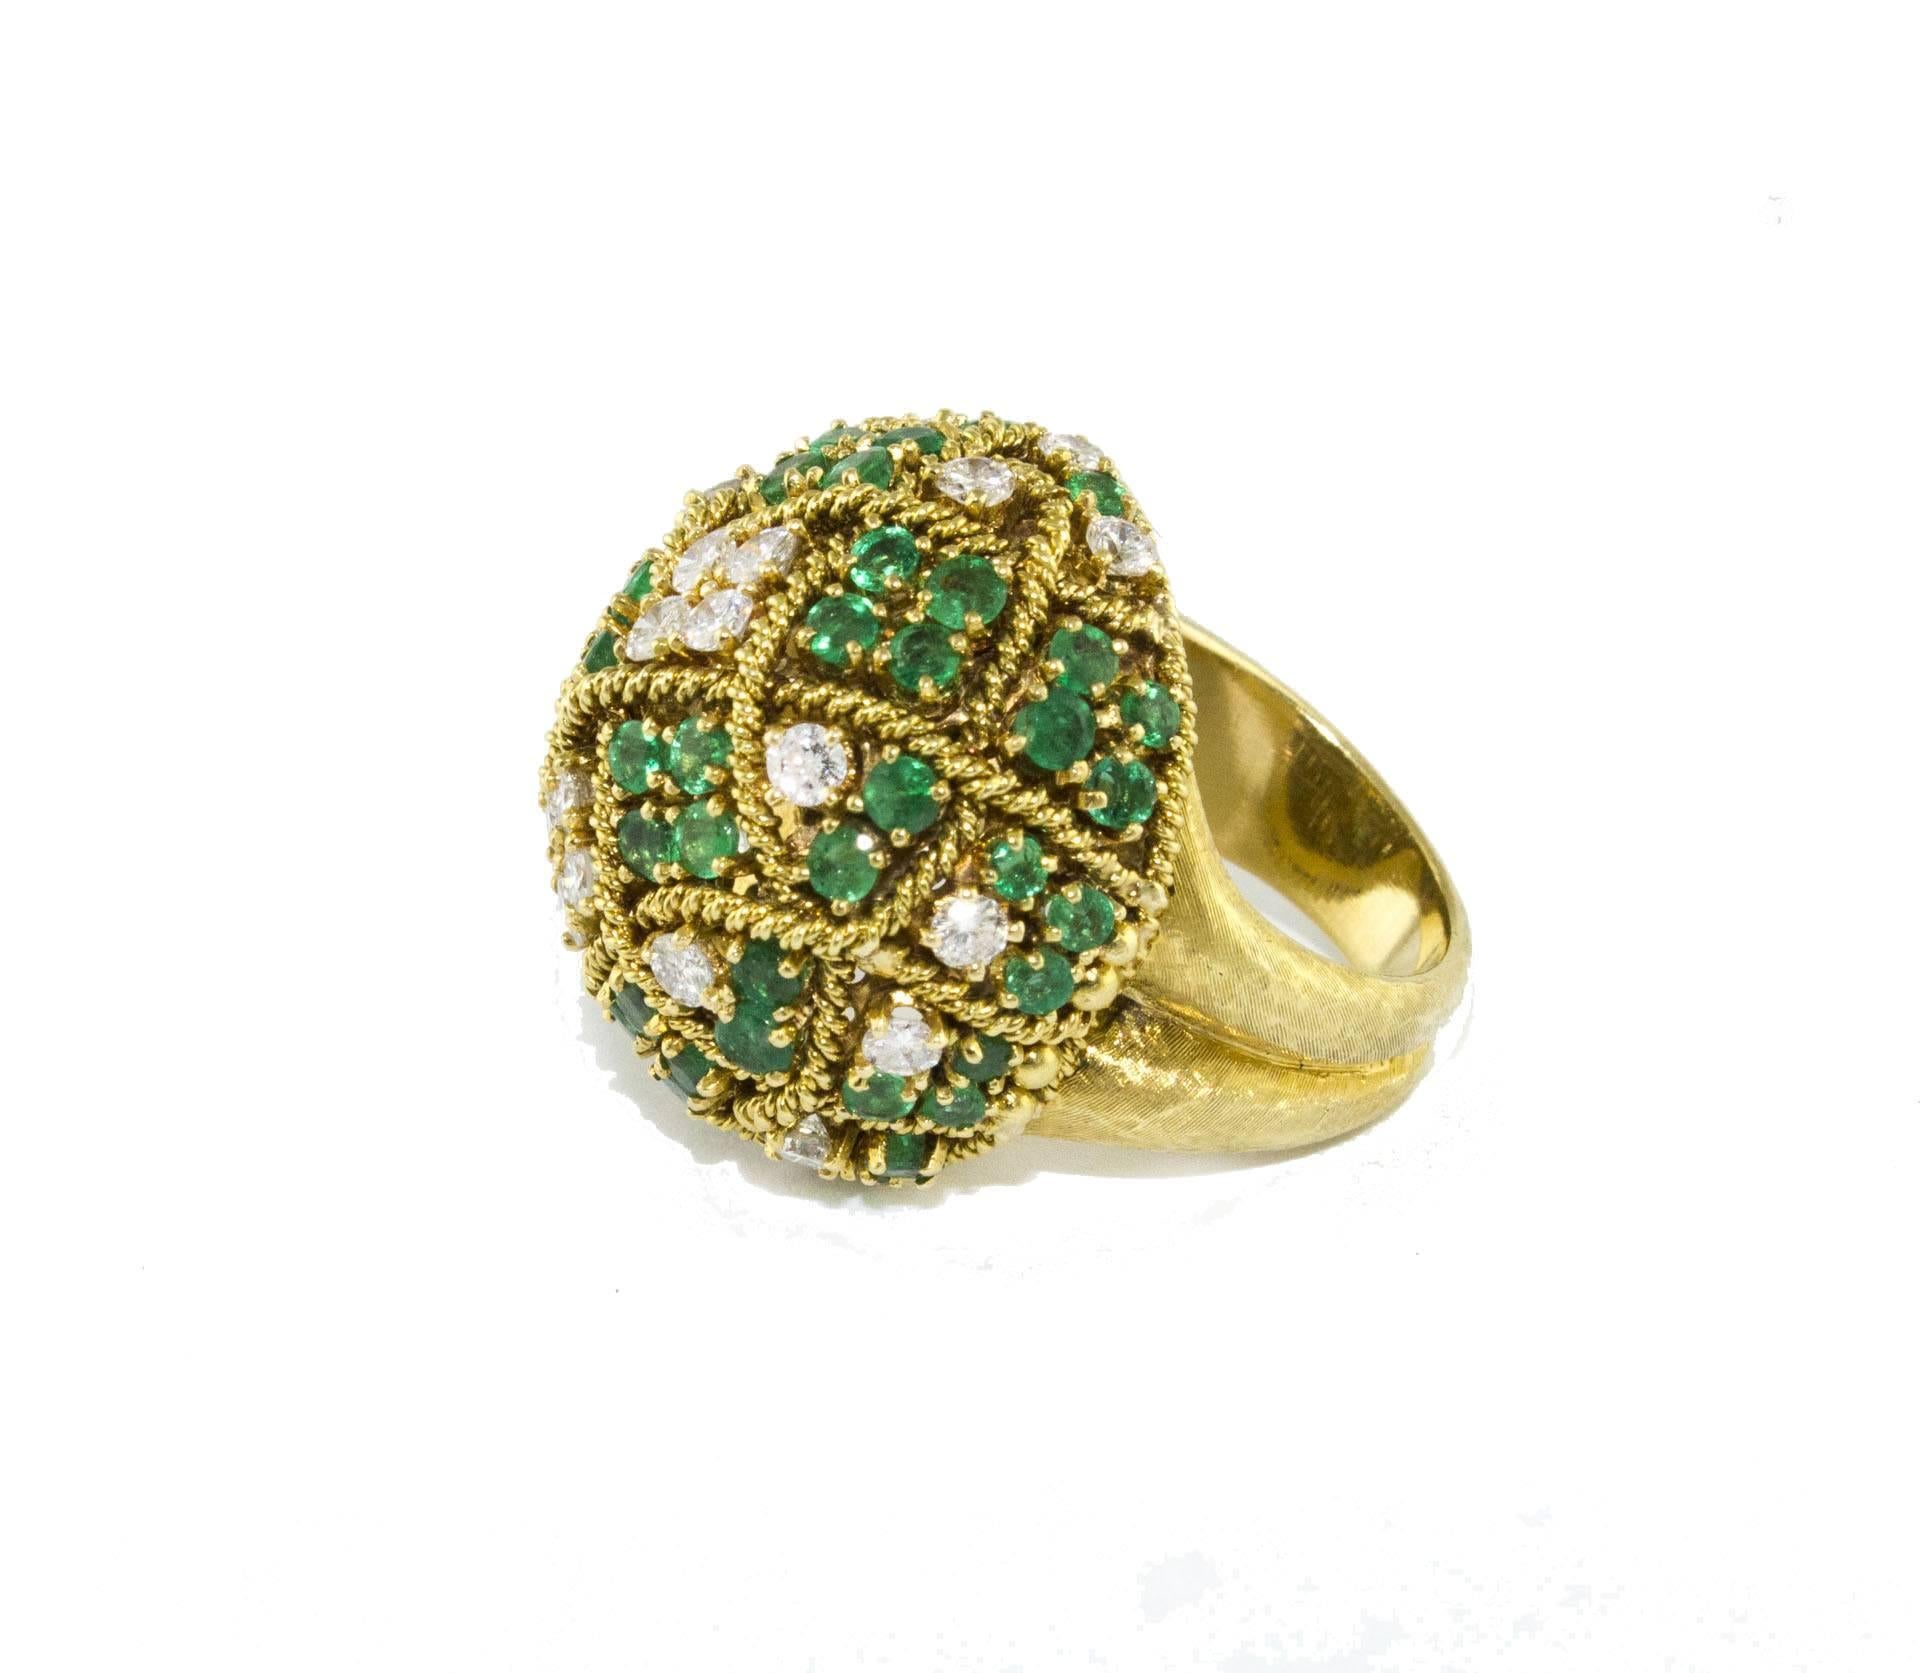 shipping policy: 
No additional costs will be added to this order.
Shipping costs will be totally covered by the seller (customs duties included). 


Fantastic ring in 18 kt yellow gold g 20.00, satin effect, enriched with marvelous diamonds ct